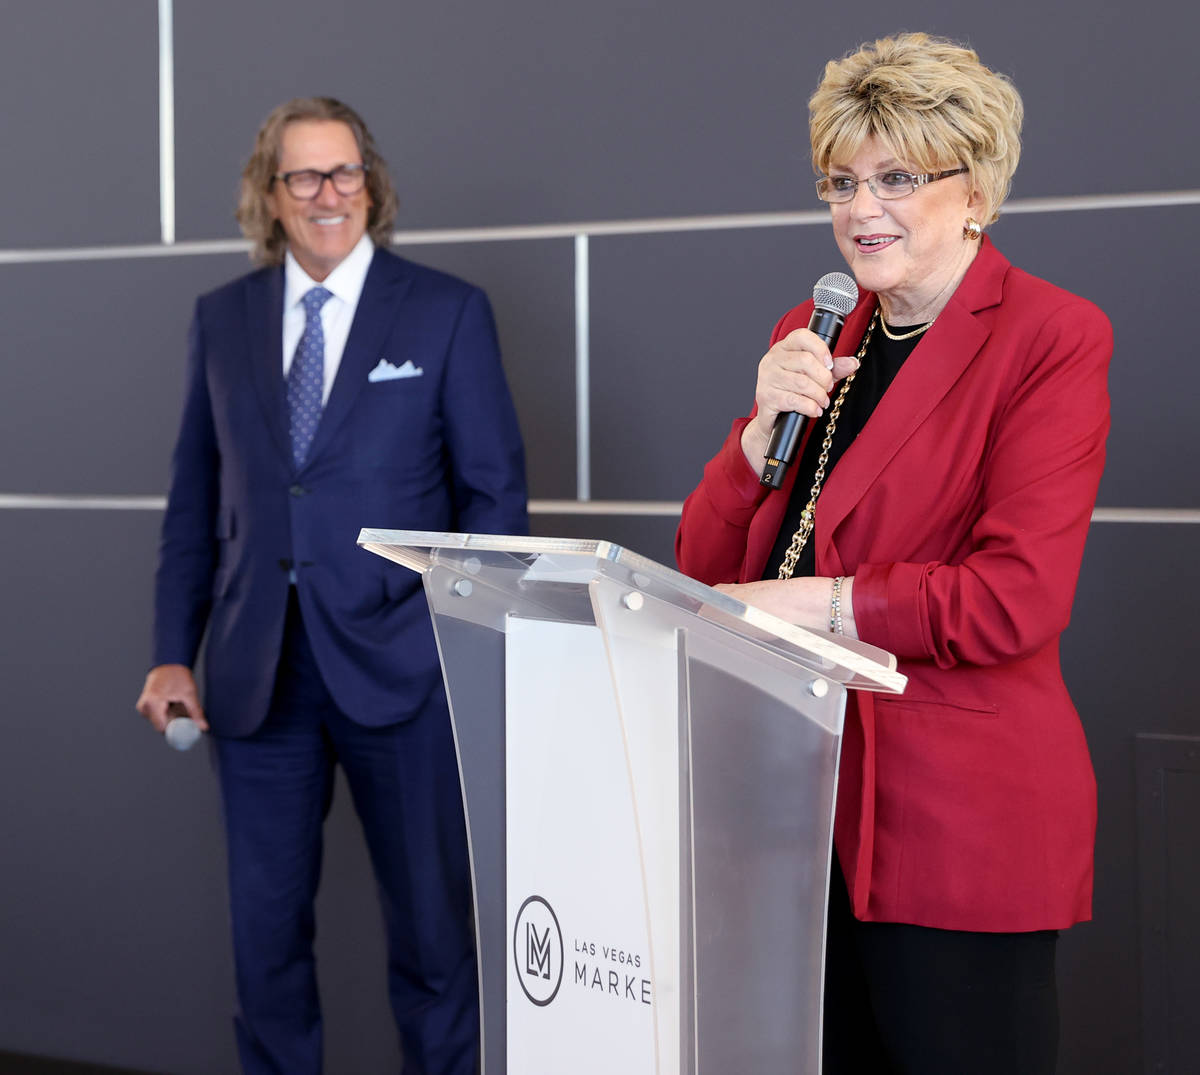 Las Vegas Mayor Carolyn Goodman and CEO Bob Maricich during a ribbon-cutting ceremony for offic ...